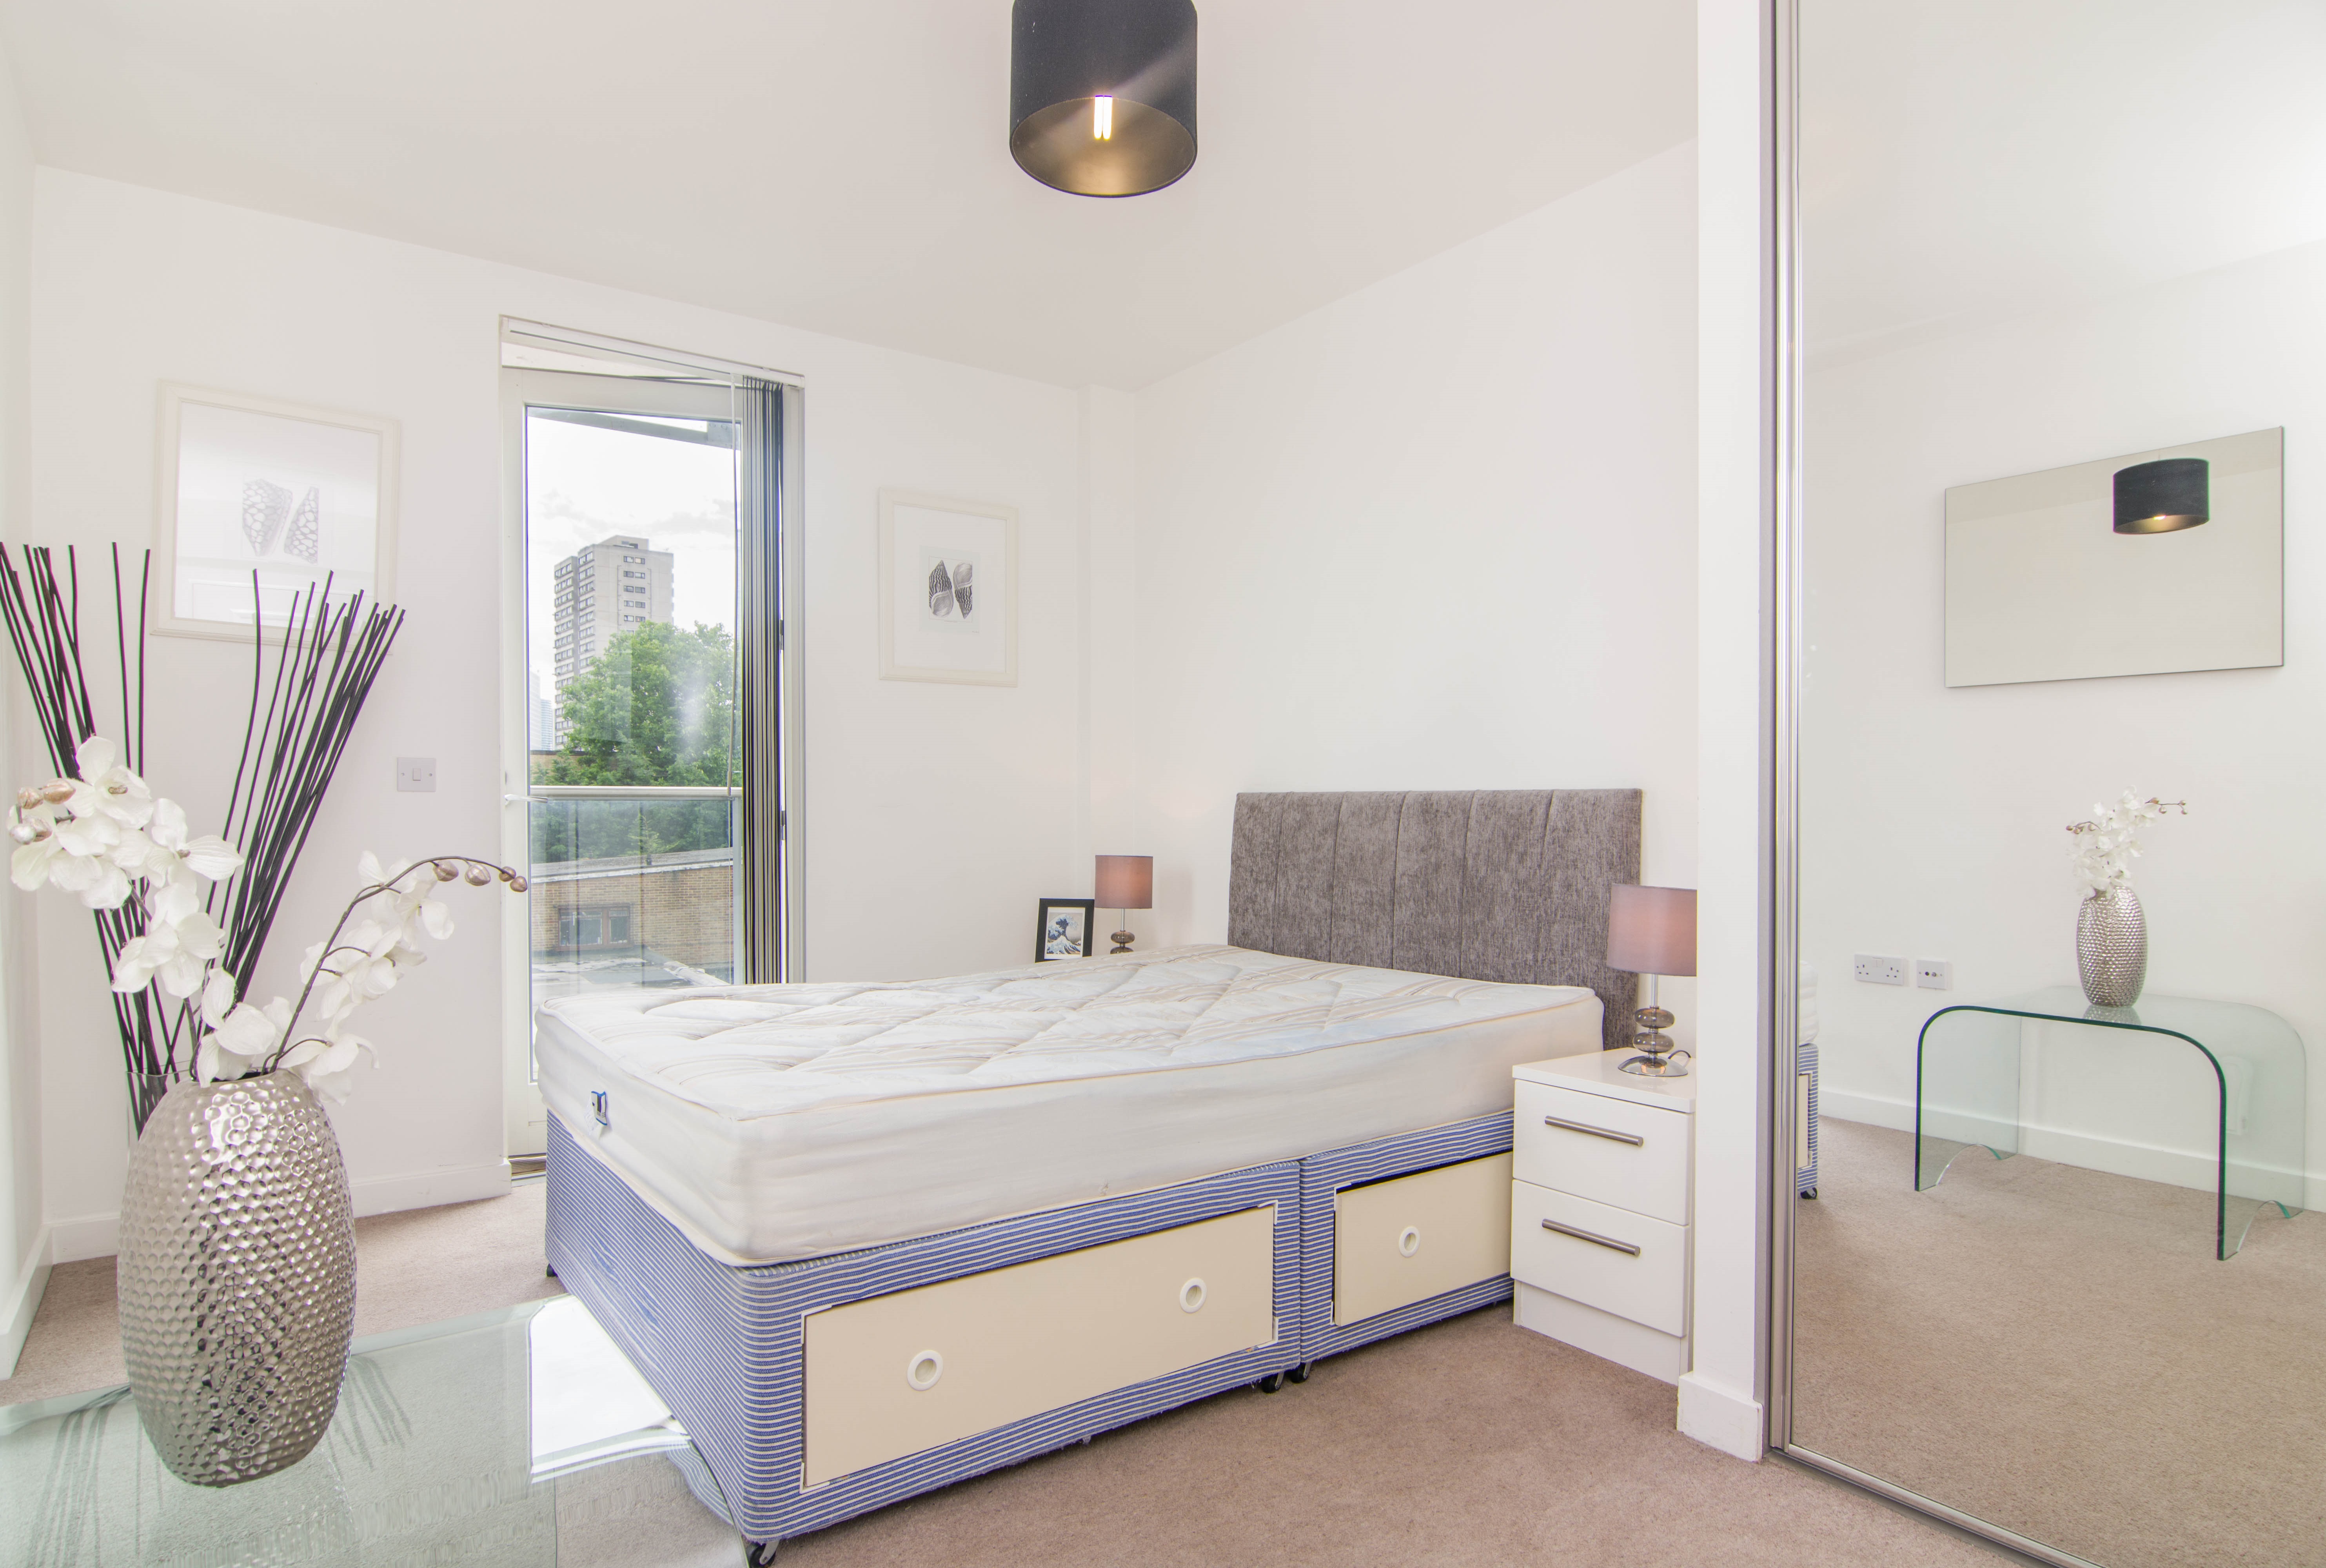 1 Bedroom Flat To Rent In 153 Cordelia Street Canary Wharf